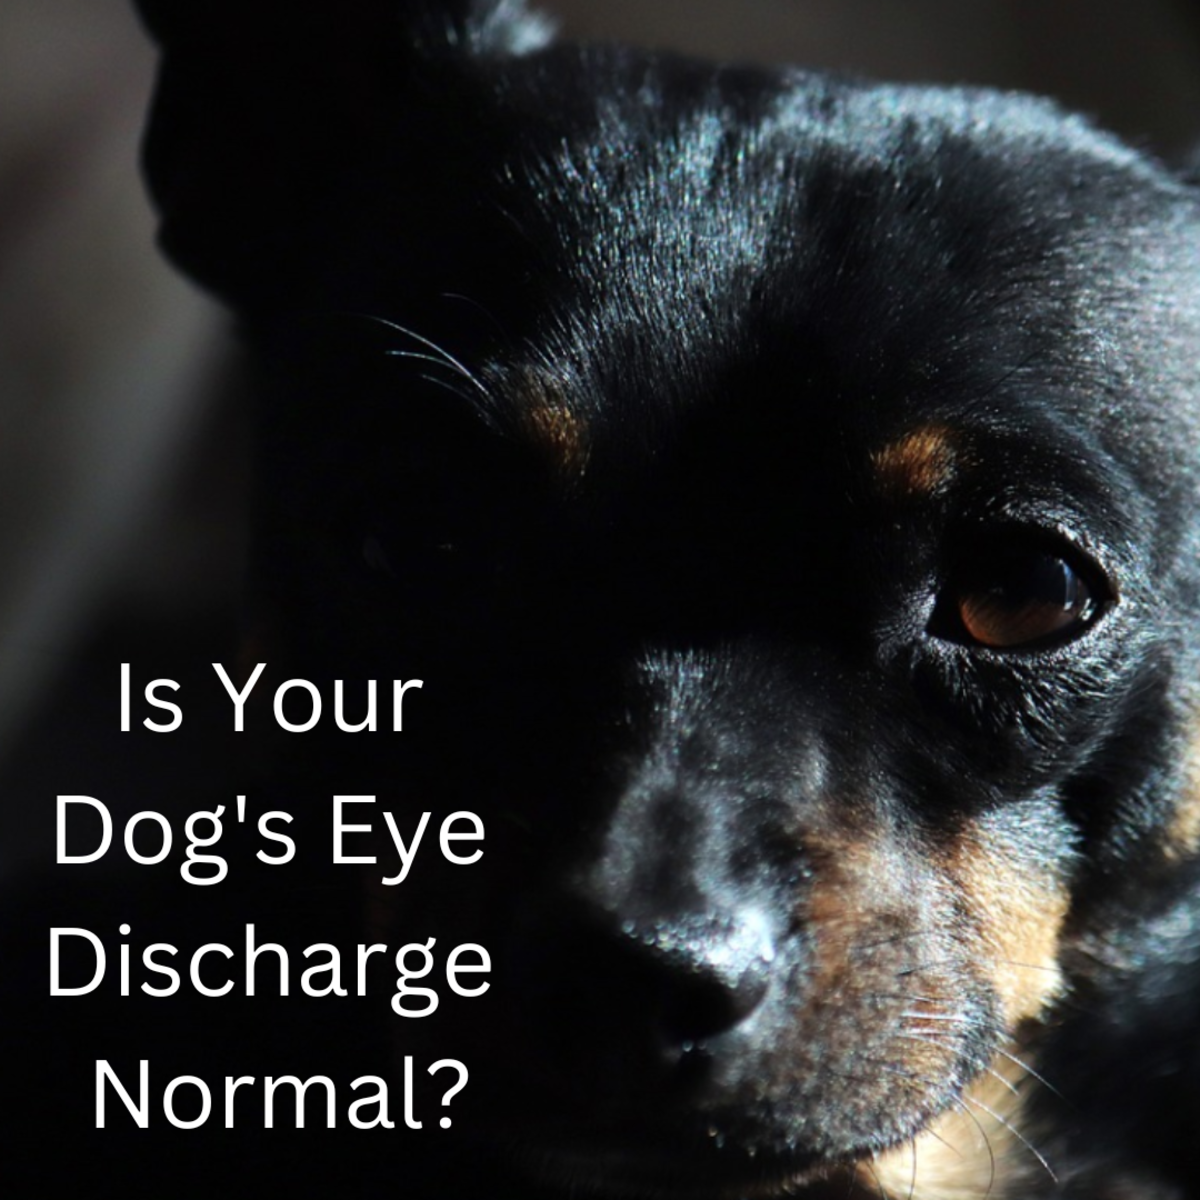 What Color Should My Dog's Eye Discharge (Boogers) Be?